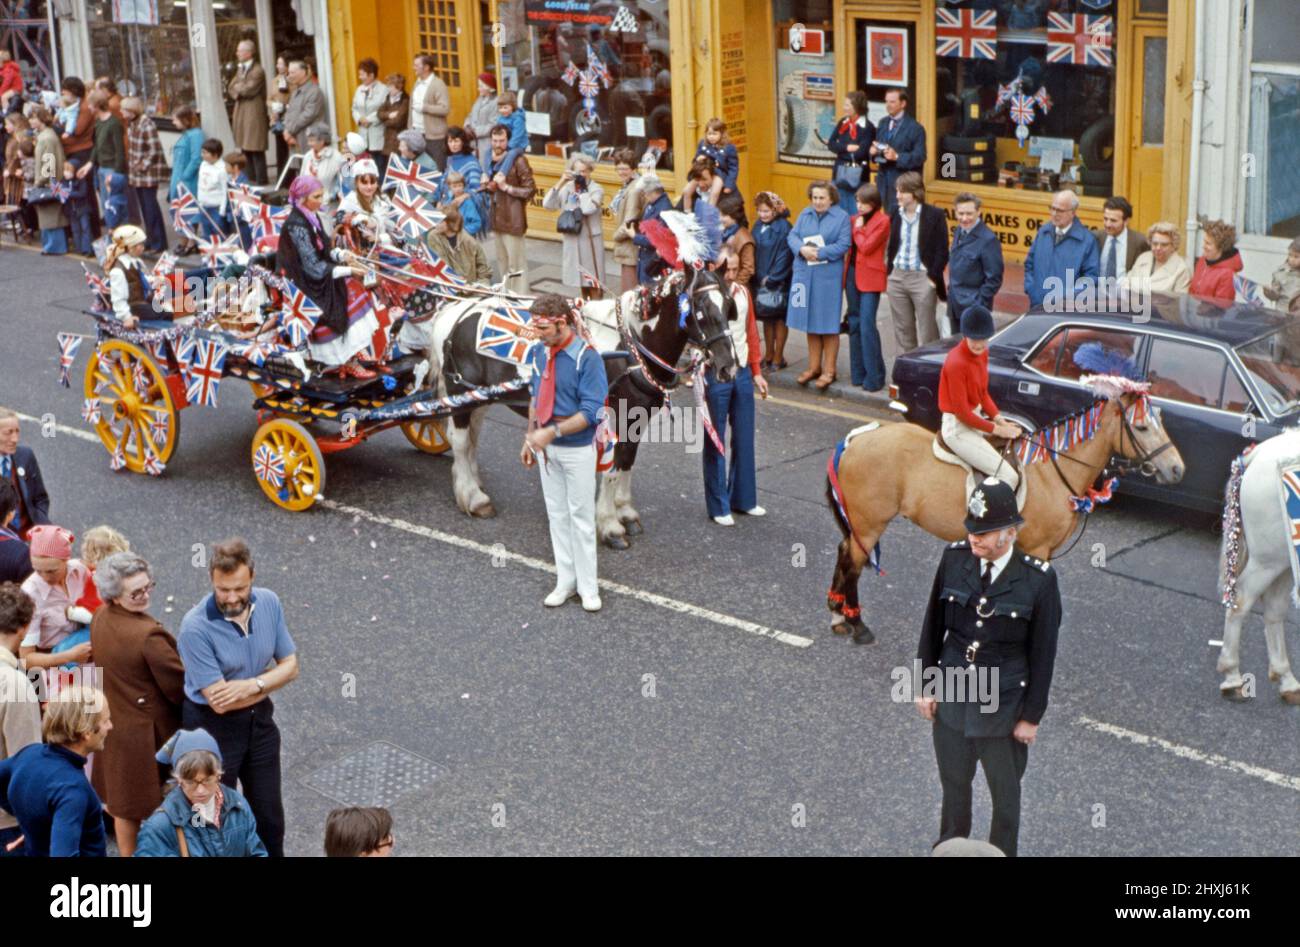 A parade held on 6 June 1977 to celebrate the Silver Jubilee of Queen Elizabeth II. This took place in Sheen Lane, East Sheen in London’s SW14, England, UK. Here a gypsy-themed horse and cart passes down the street. Union Jack flags of all sizes are on show. The twenty fifth anniversary of the Queen’s coronation was on 6 February 1977 but 7 June was designated for a major official and unofficial celebration day across the country. This image is from an old amateur colour transparency – a vintage 1970s photograph. Stock Photo